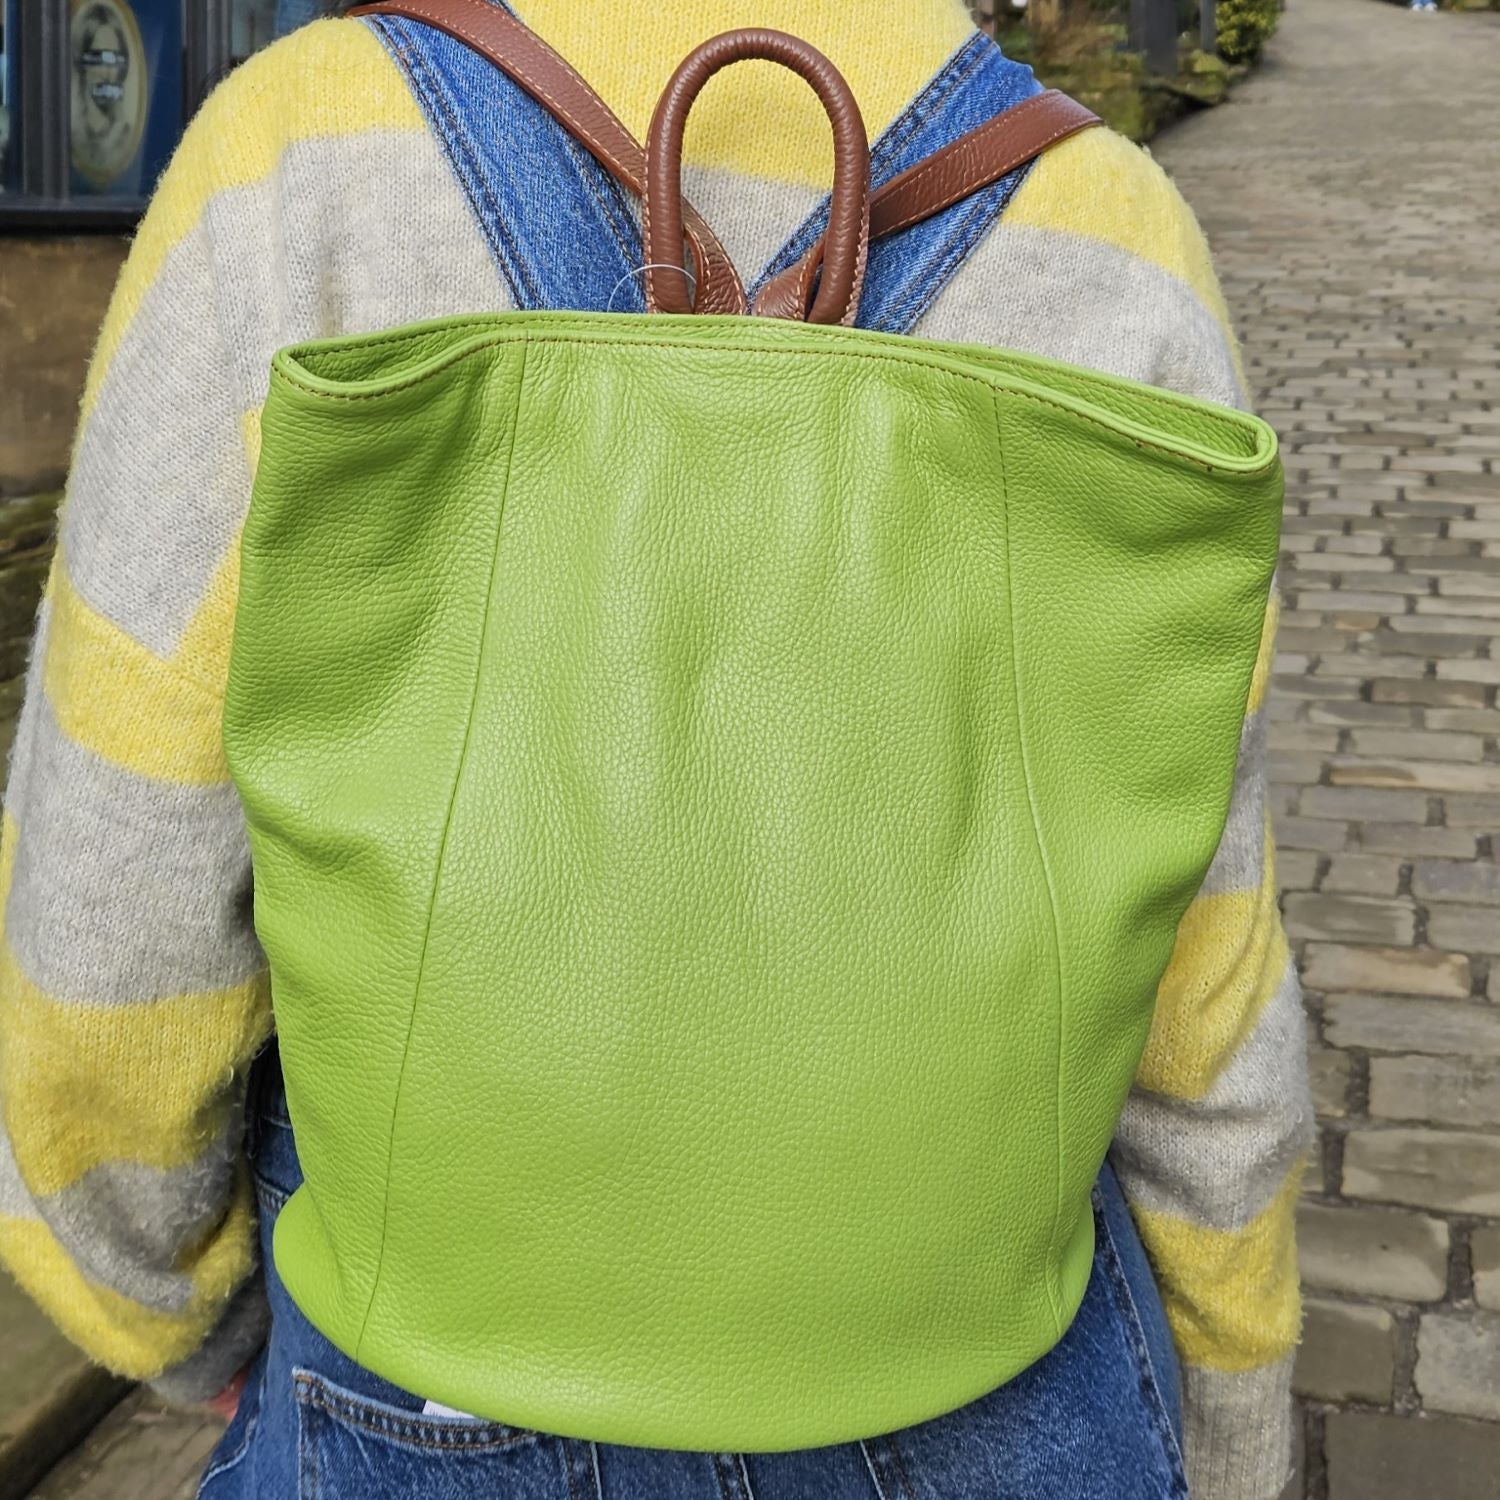 Discover the perfect blend of style and convenience with this Italian leather postman's lock backpack! Its sumptuous, pebbled leather offers timeless sophistication and makes a bold statement wherever you go. Keep your belongings safe and secure with both the postman's lock and zip closure. And with its spacious design, you'll have plenty of room to store your everyday essentials.